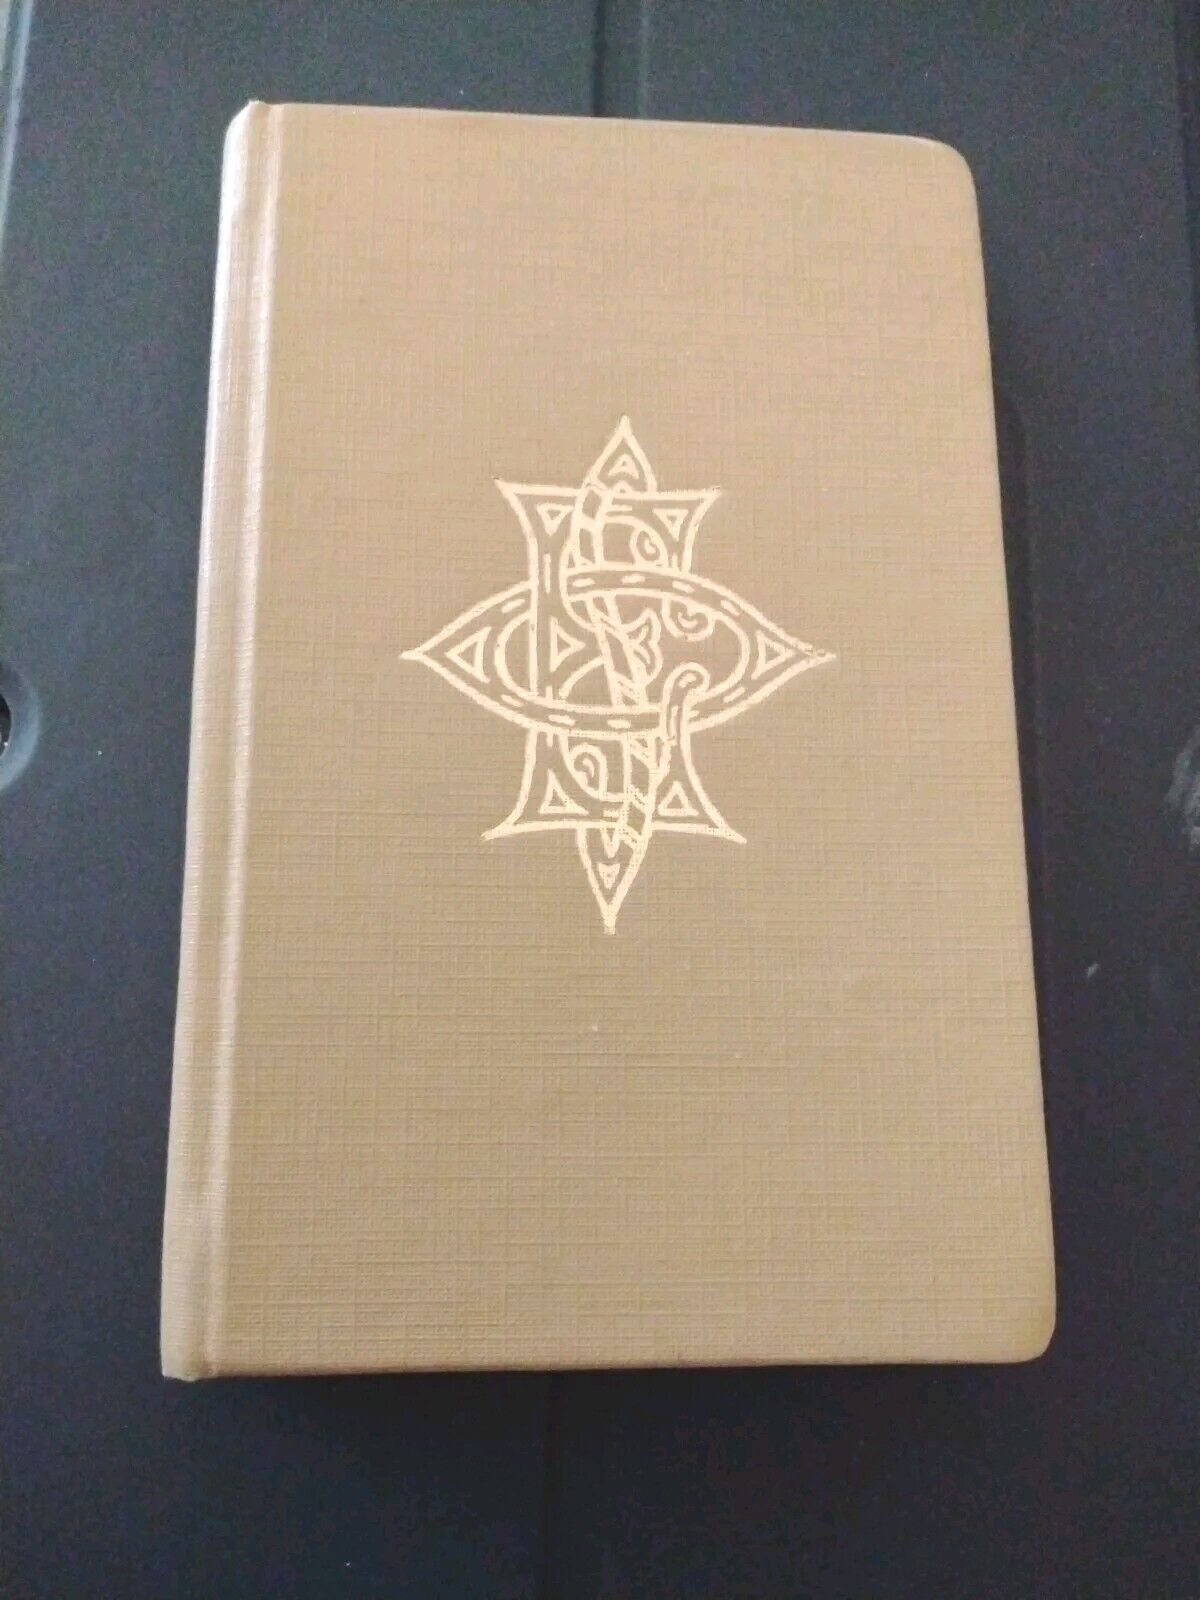 Vintage 1953 Freemasons Rituals of the Order of the Eastern Star Hardcover Book 